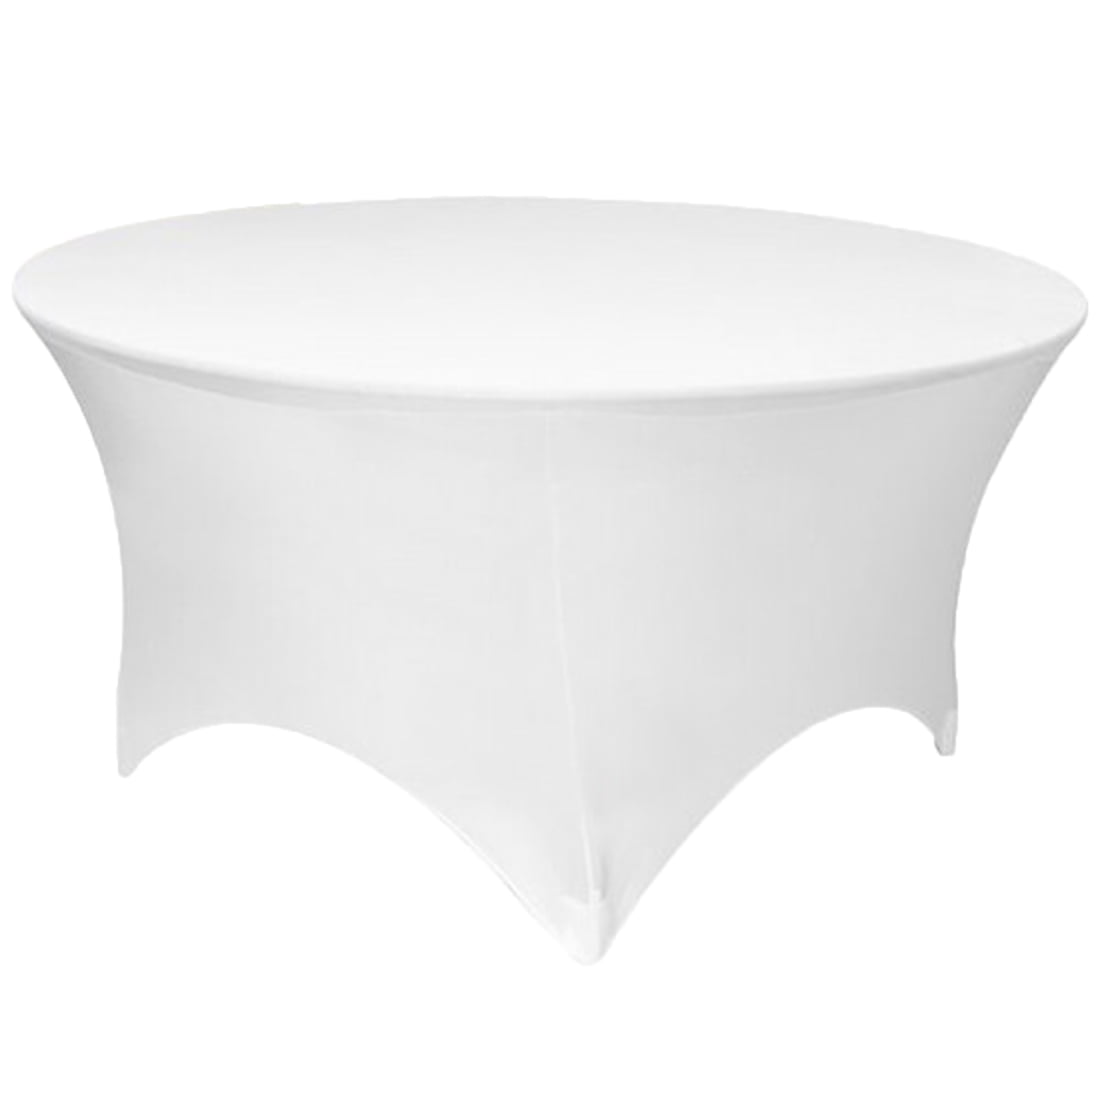 Gowinex White 5 Ft Round Spandex, What Size Linen For 5ft Round Tablecloth